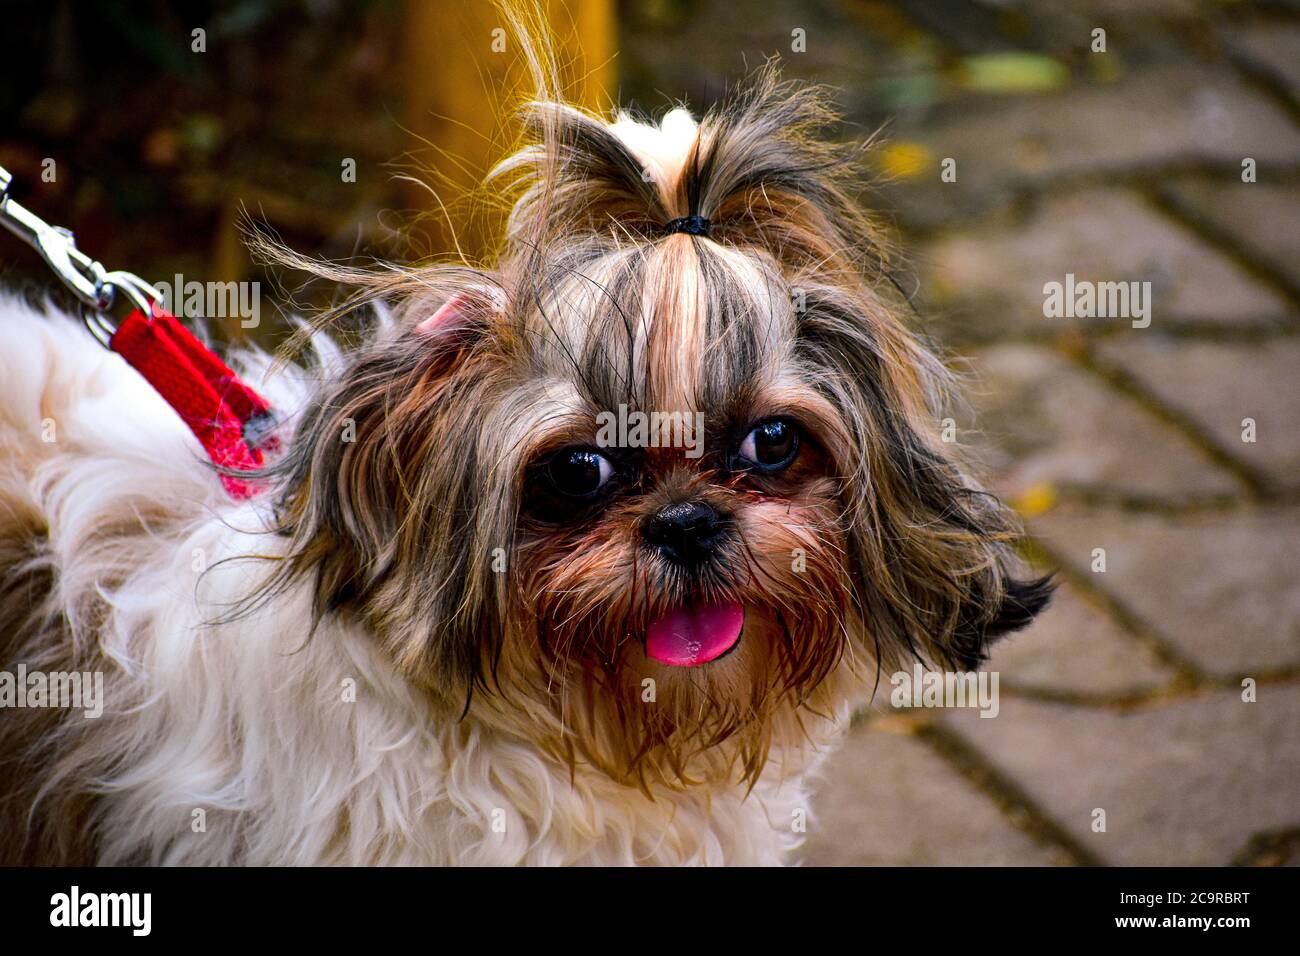 Shih Tzu dog breed with a cute pony tail on its head with tongue out photographed outside on a sunny day Stock Photo